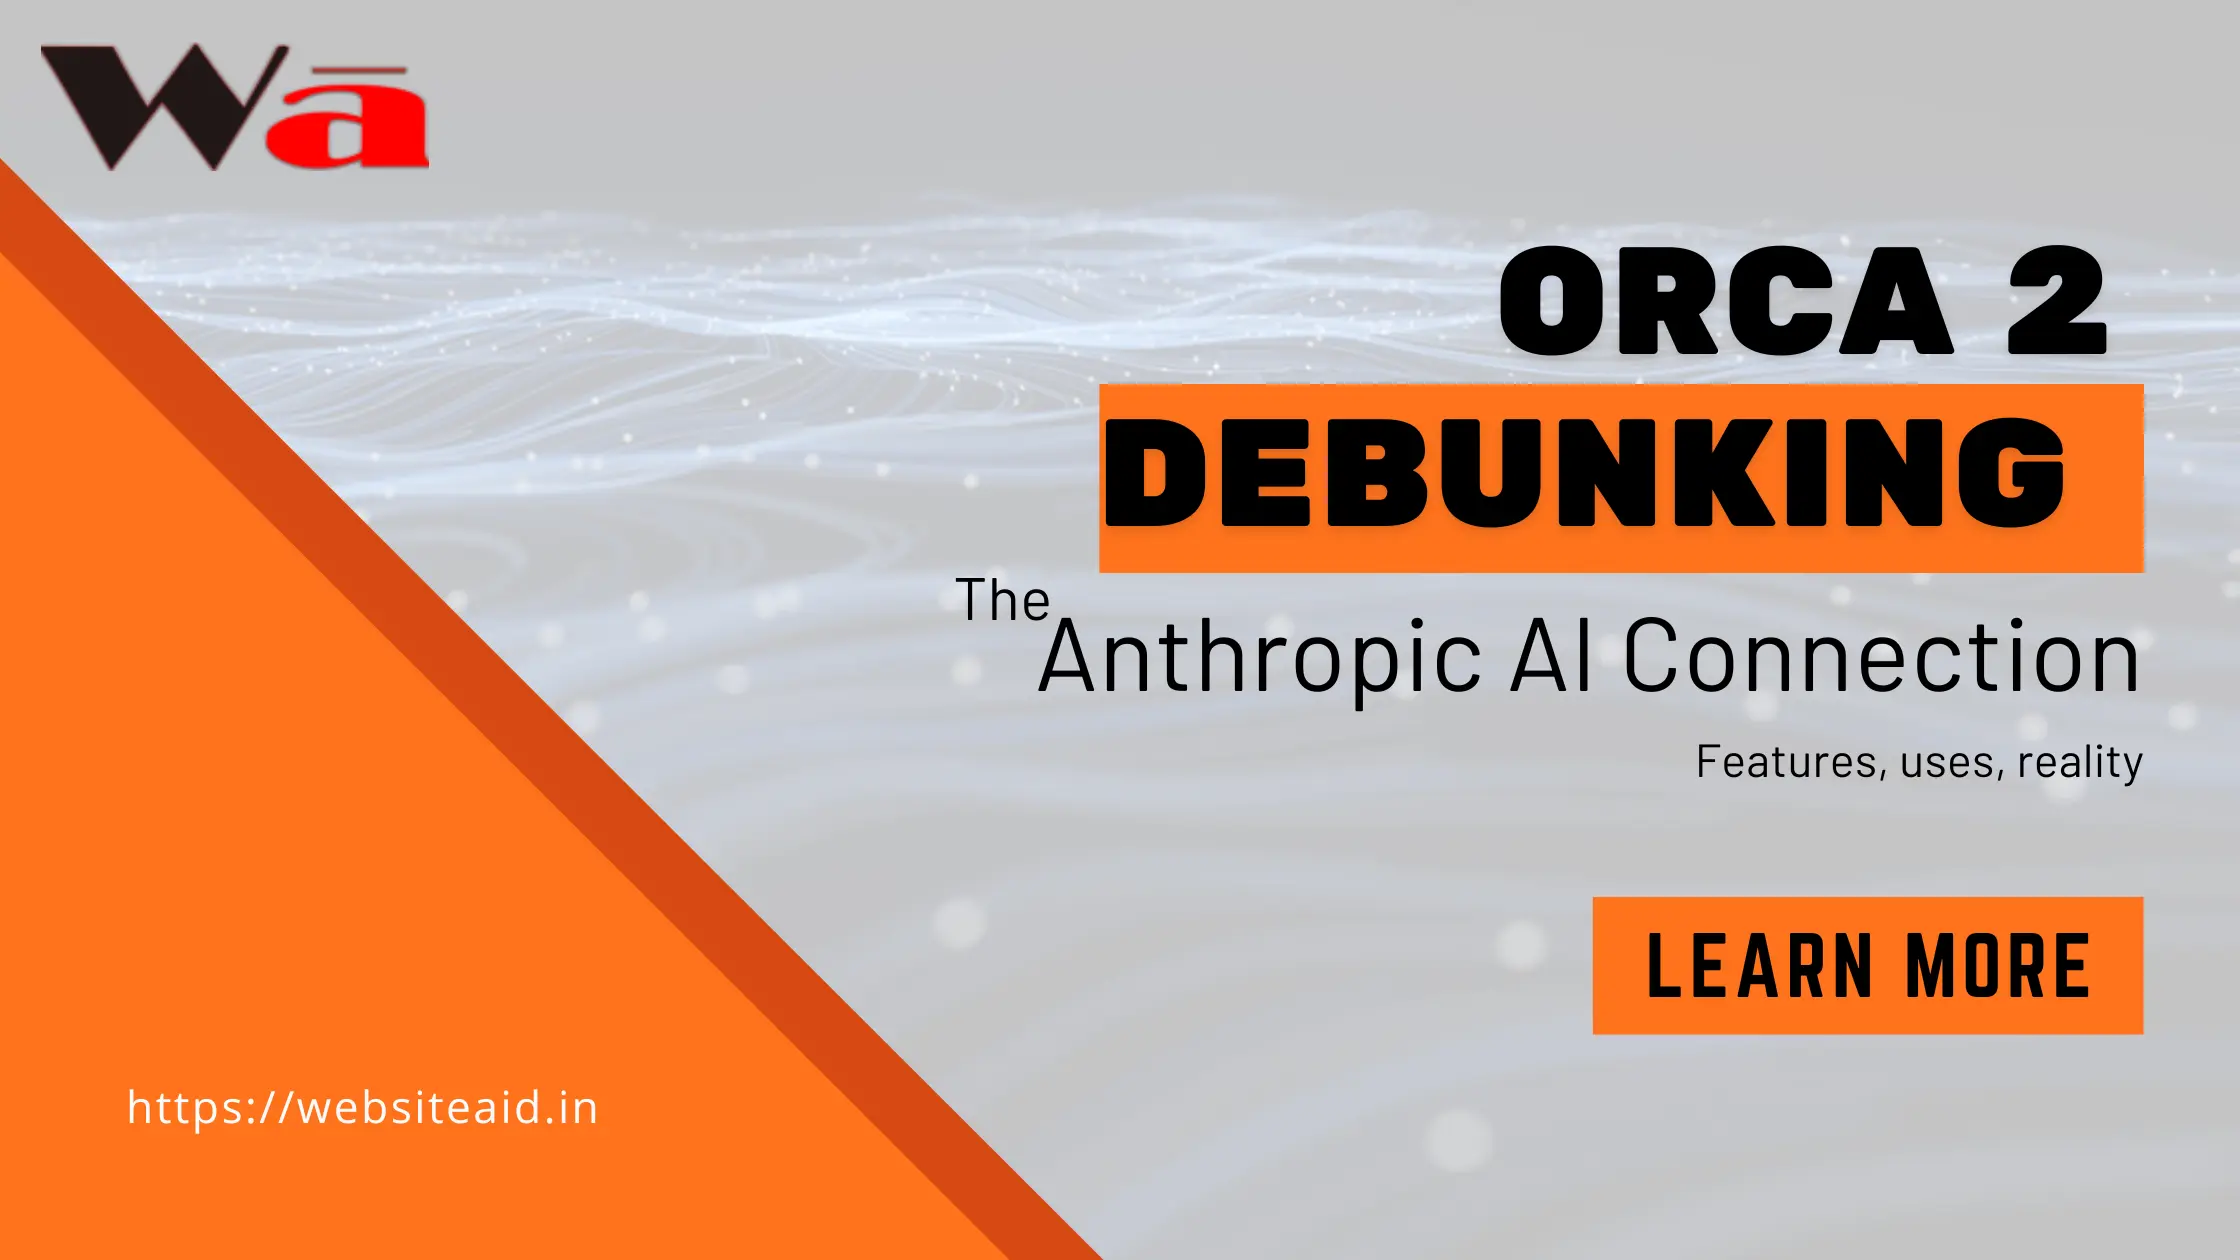 Orca 2 Debunking the Anthropic AI Connection